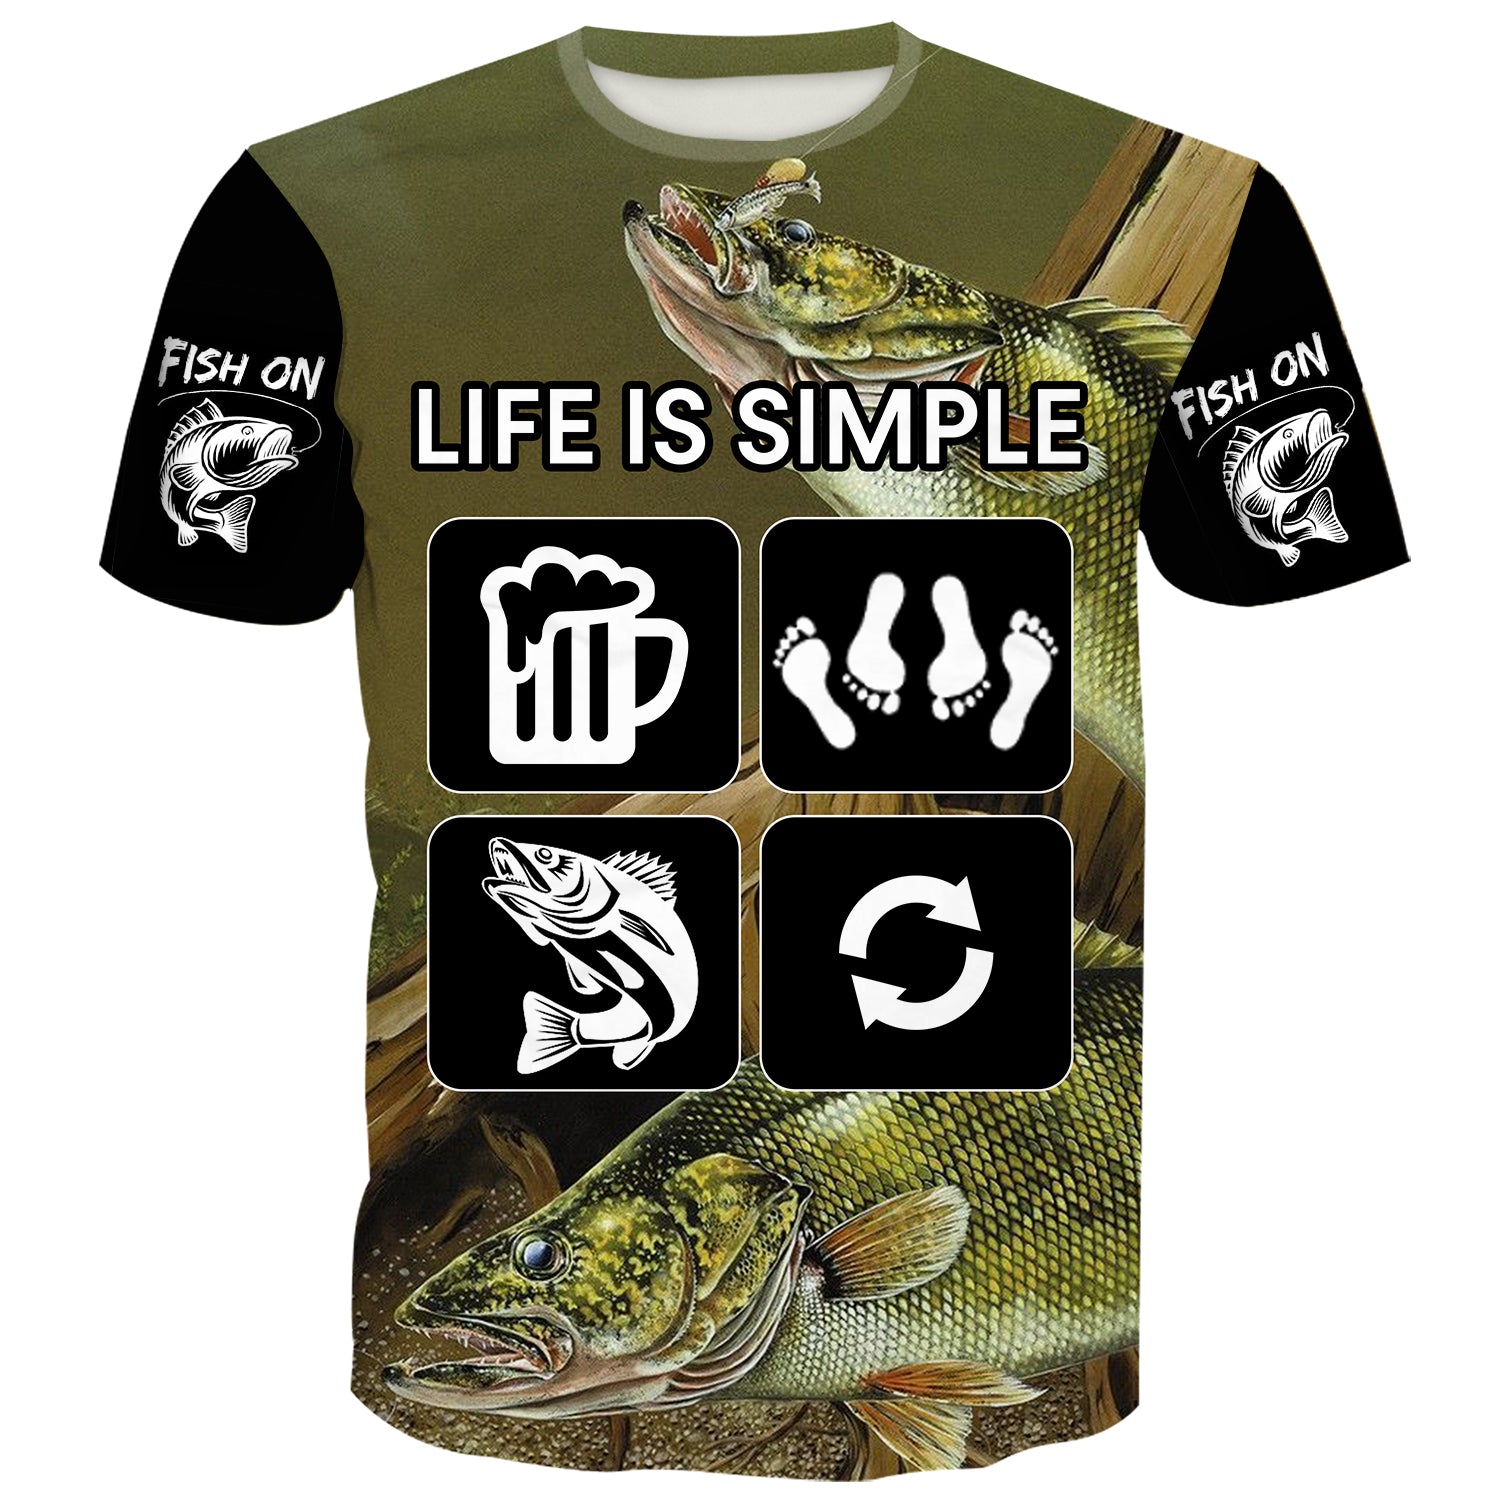 Life is Simple - Fish on T-Shirt